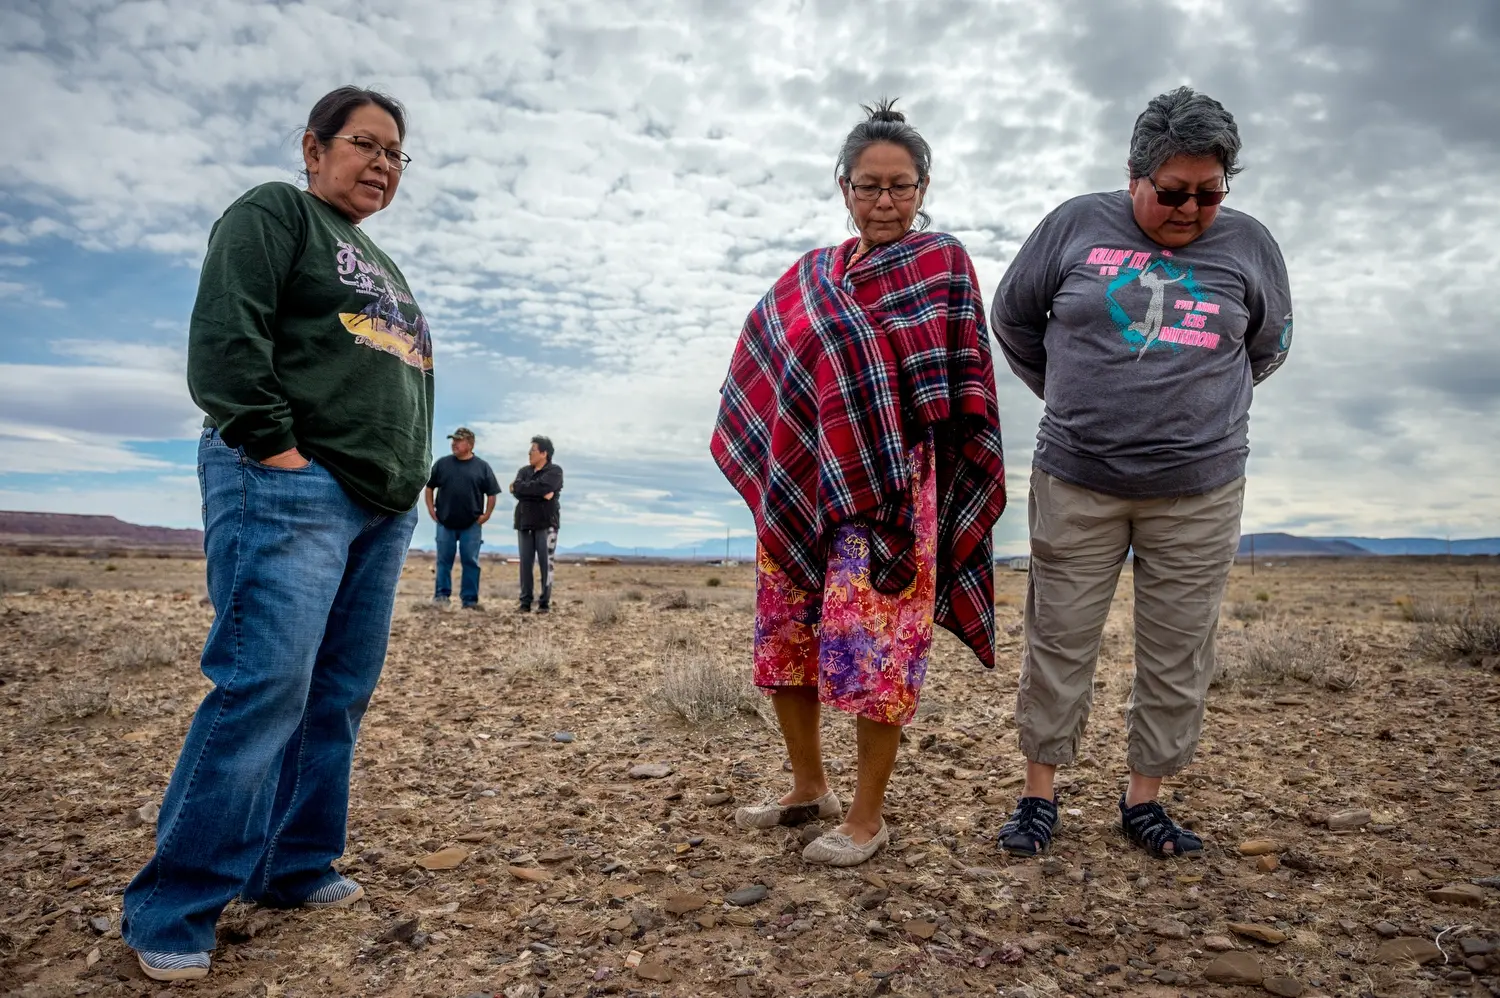 Sisters Linda Talker, Carol Talker and Leona Begishie walk near their family home in Cameron, Ariz. Image by Mary F. Calvert. United States, 2020.